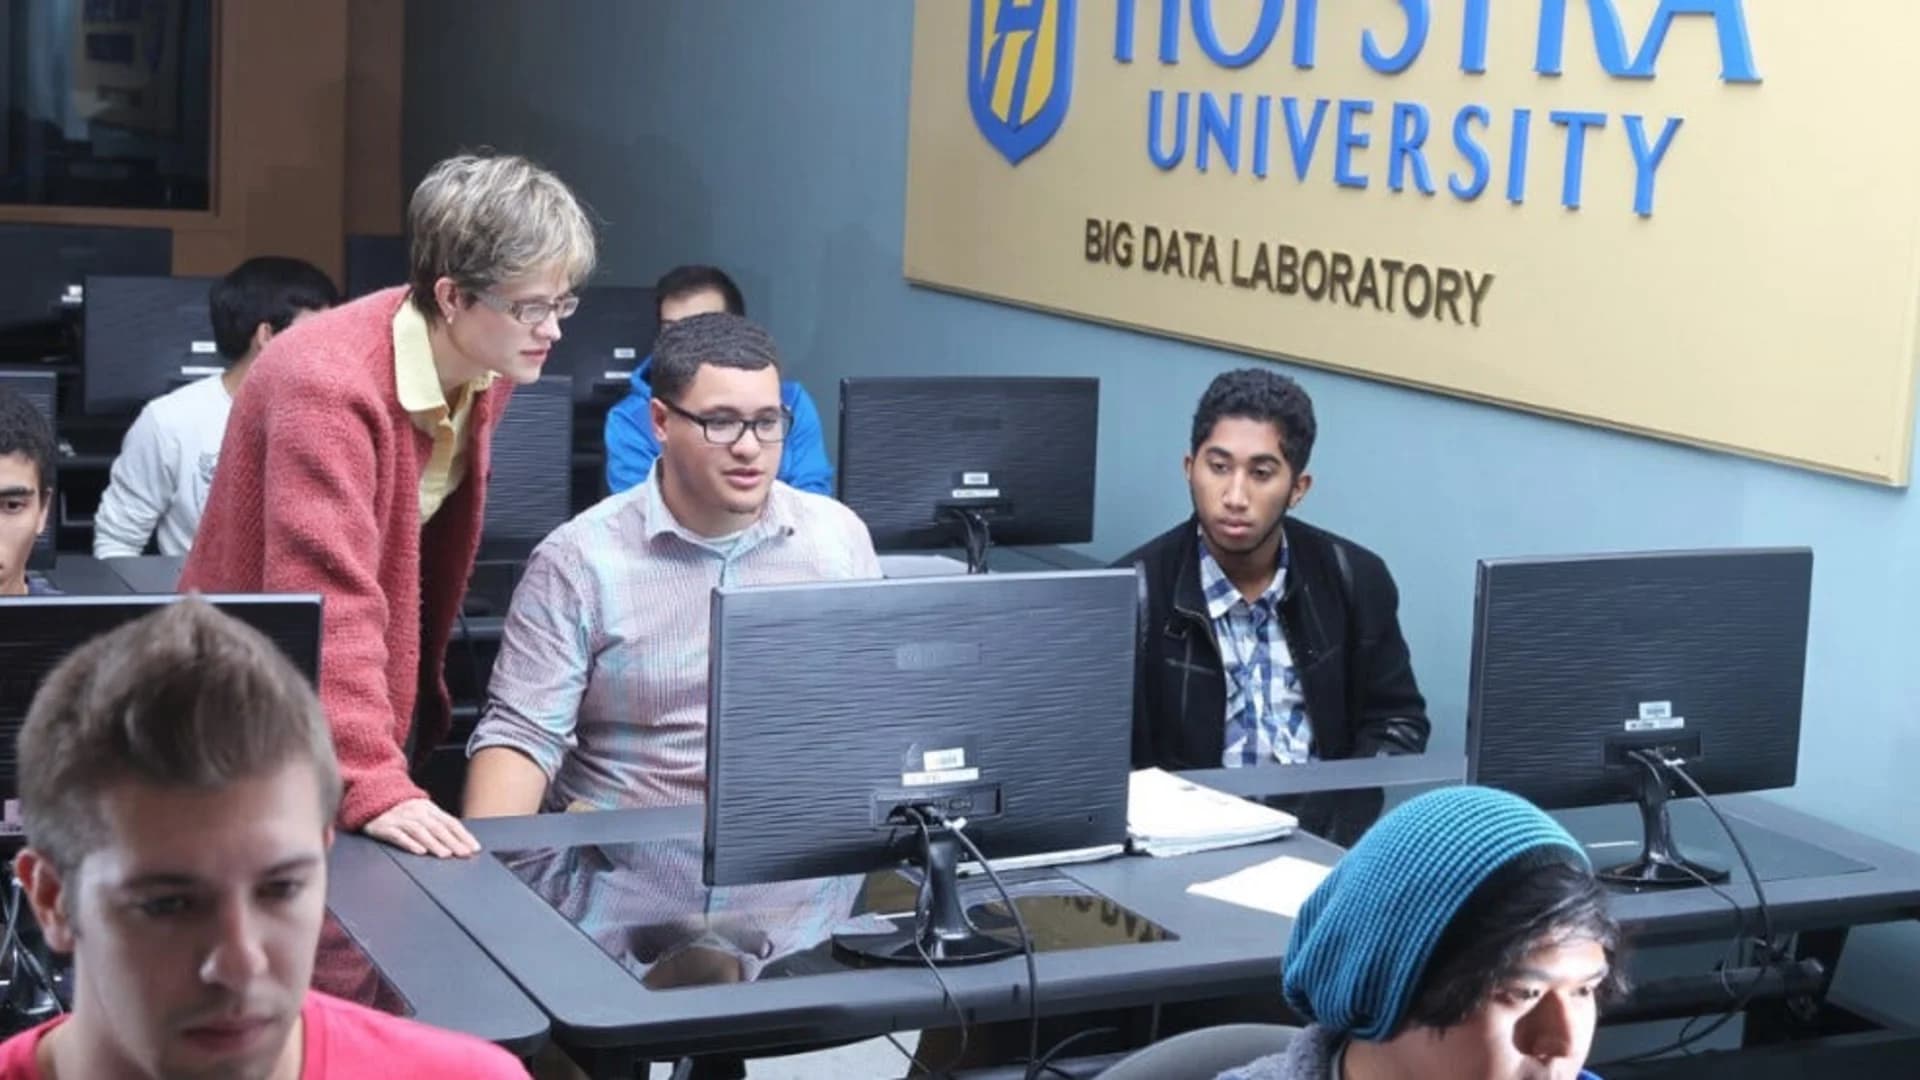 Hofstra University lends resource lab for worldwide COVID-19 research